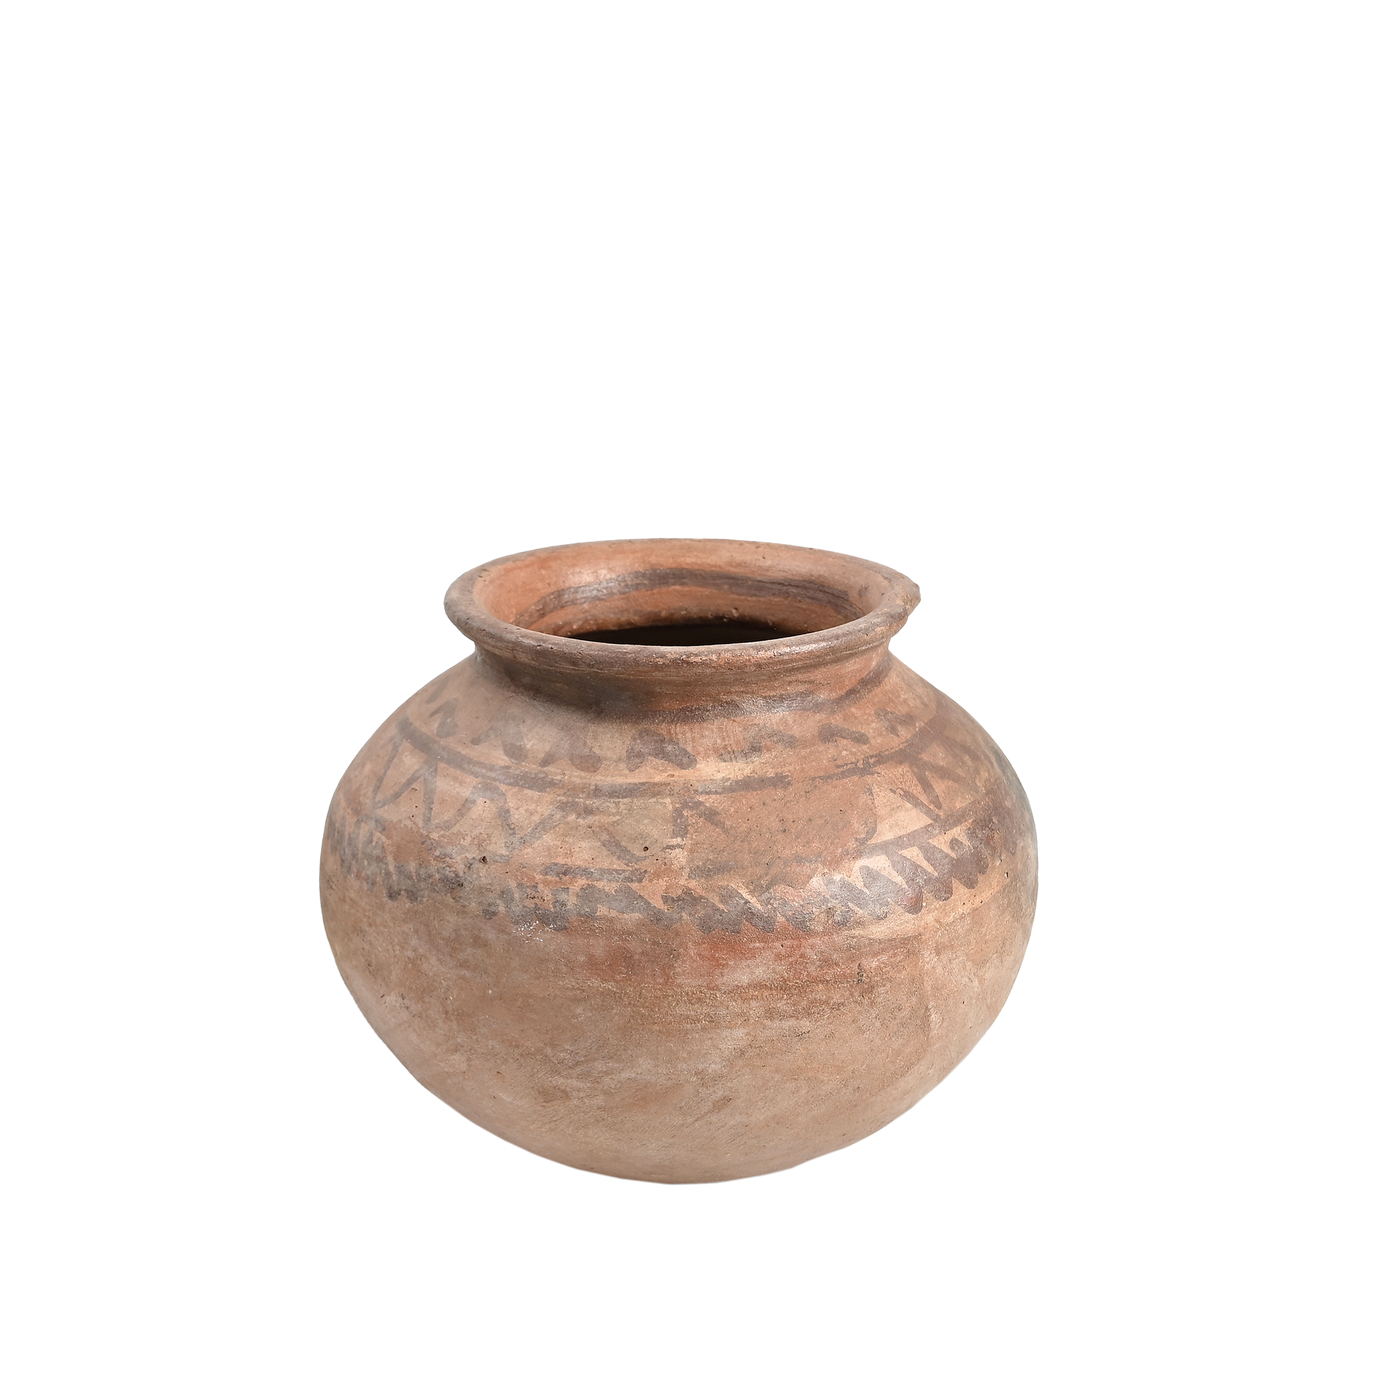 Gaon - Poterie traditionnelle n°28